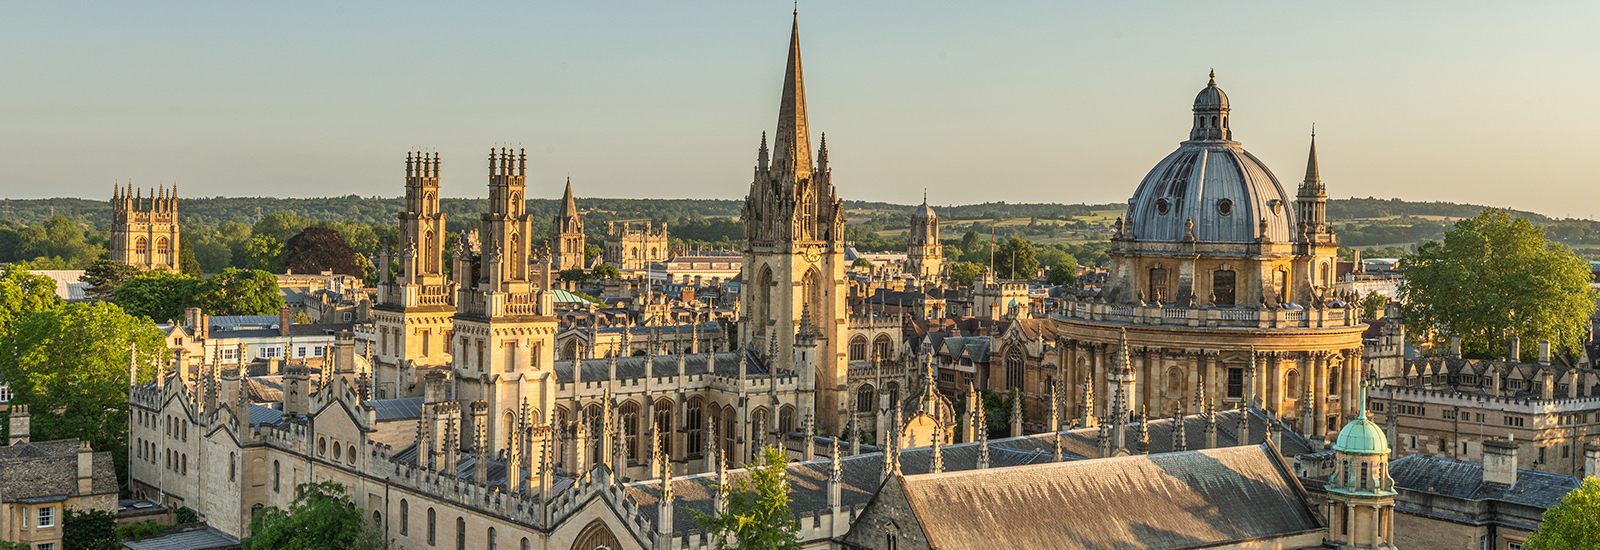 University regulations and policies | University of Oxford